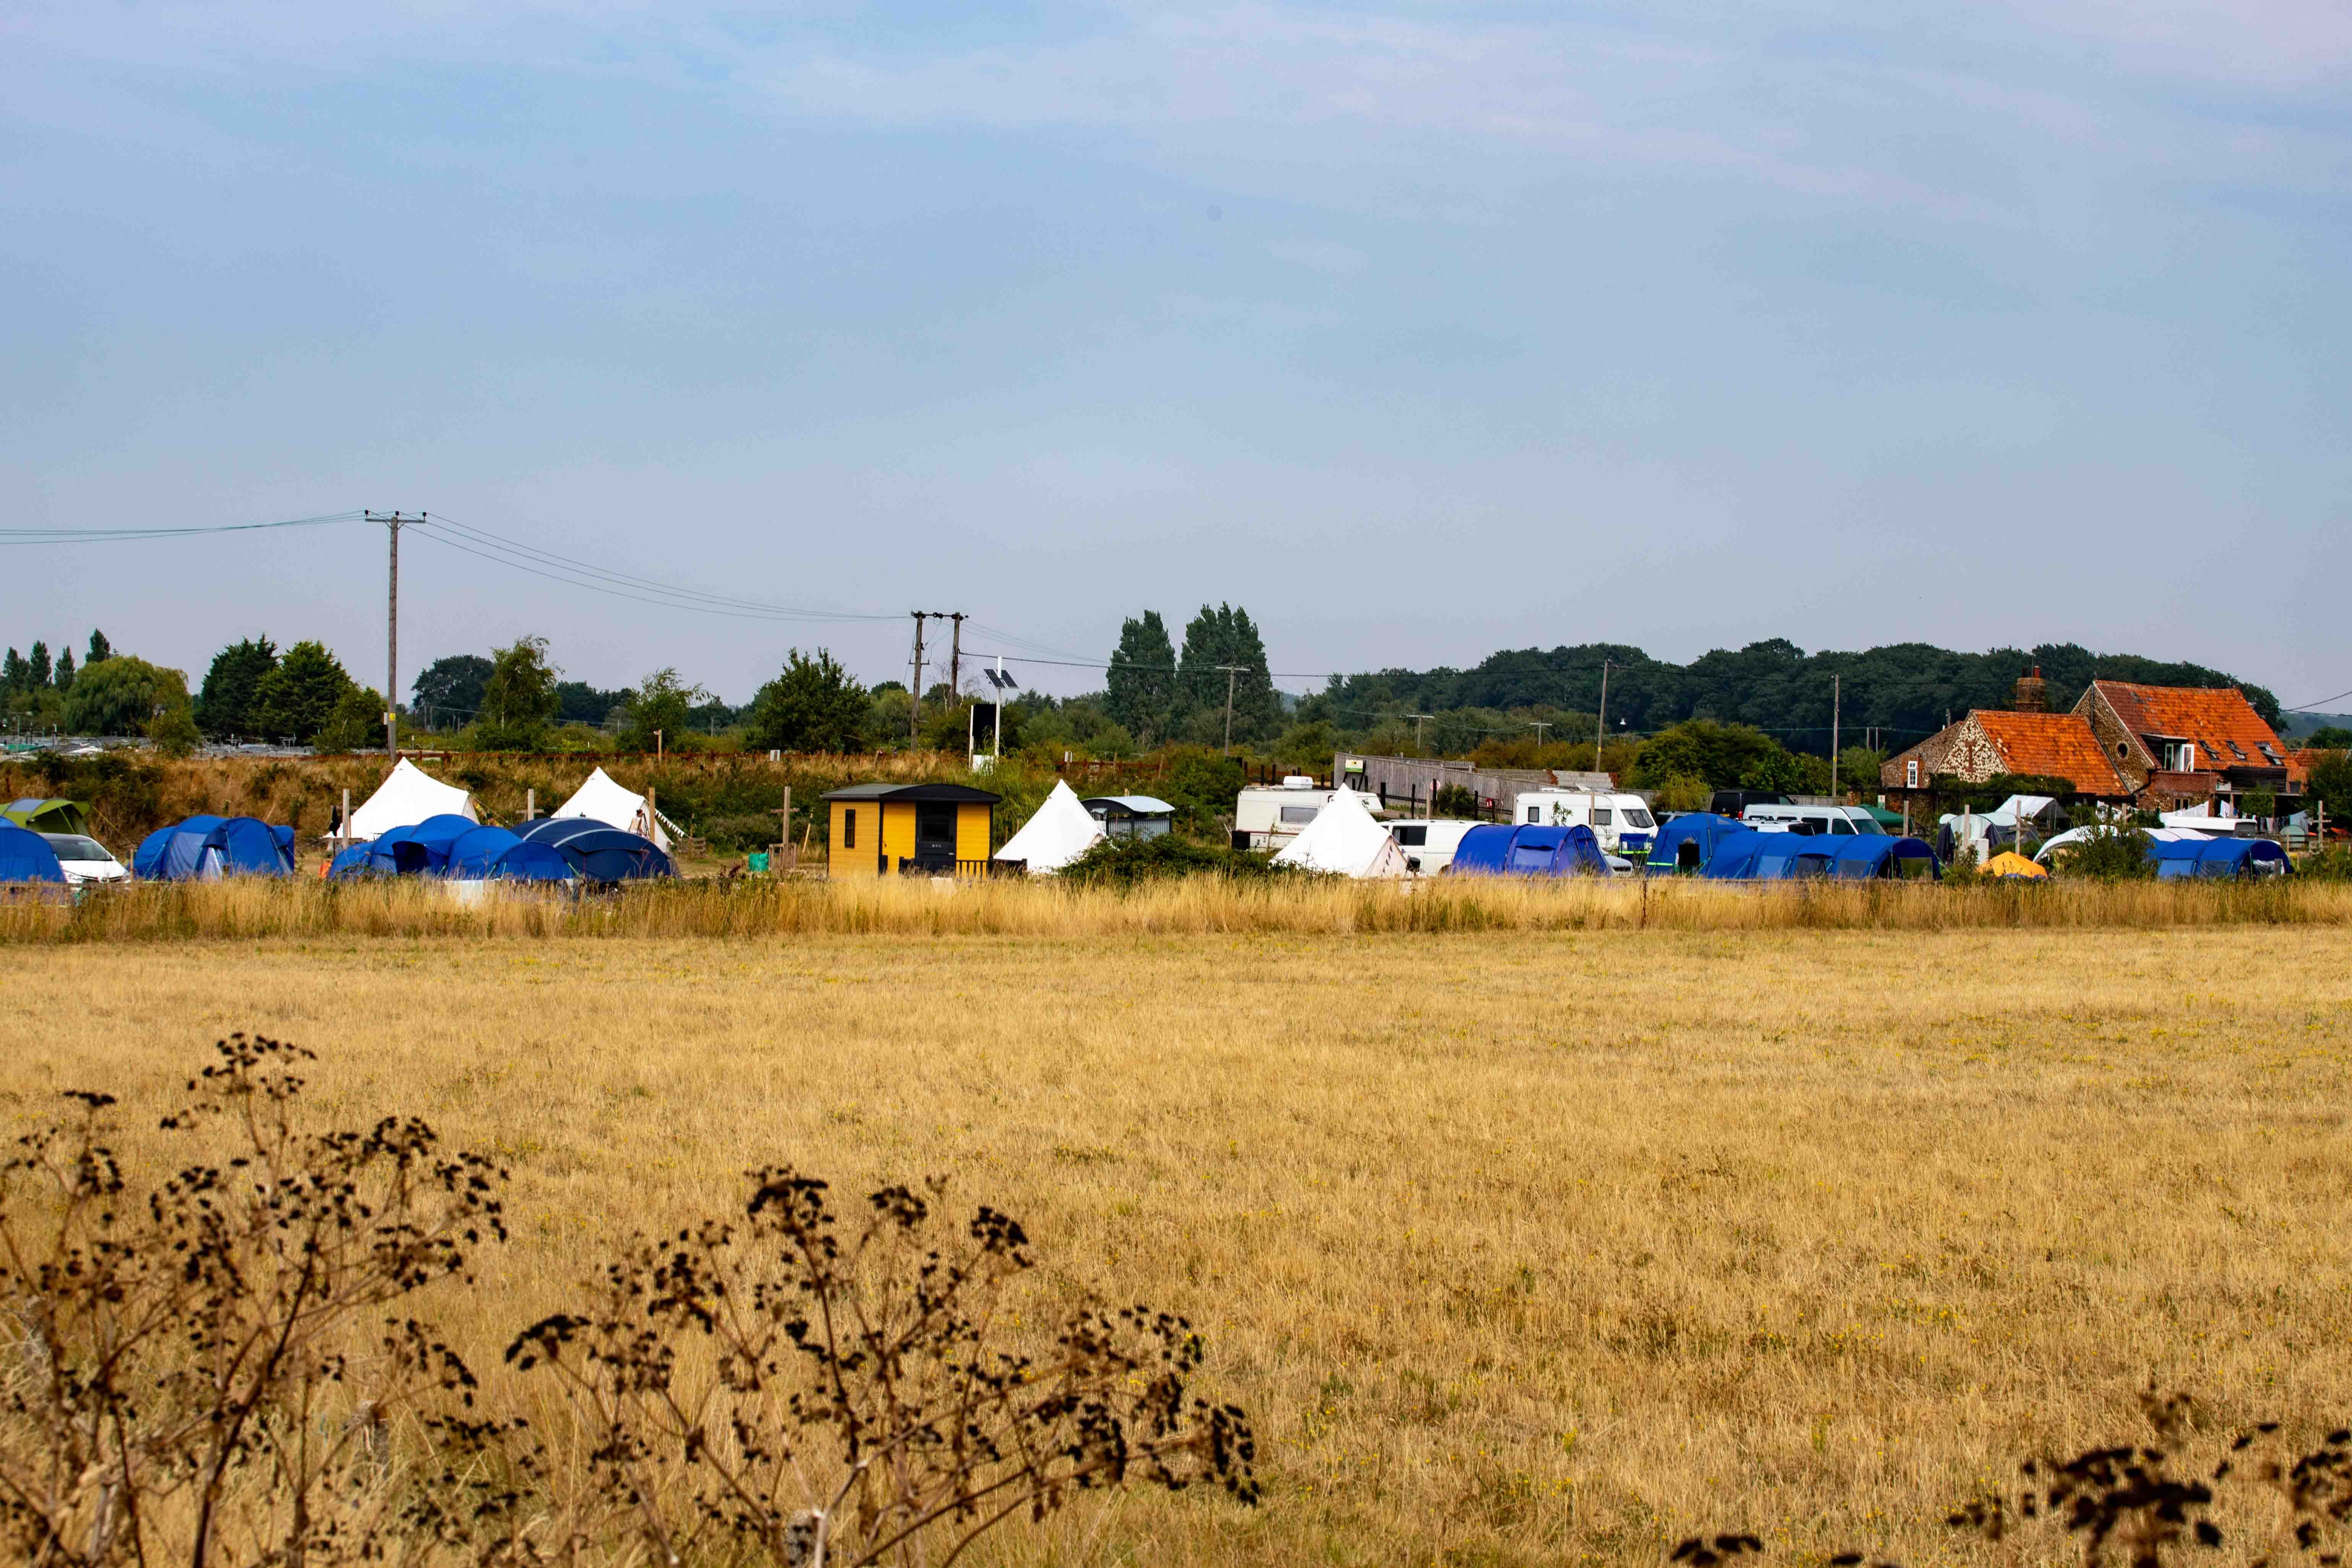 A hot hot summer has scored the field that surround Hunstanton Camping 